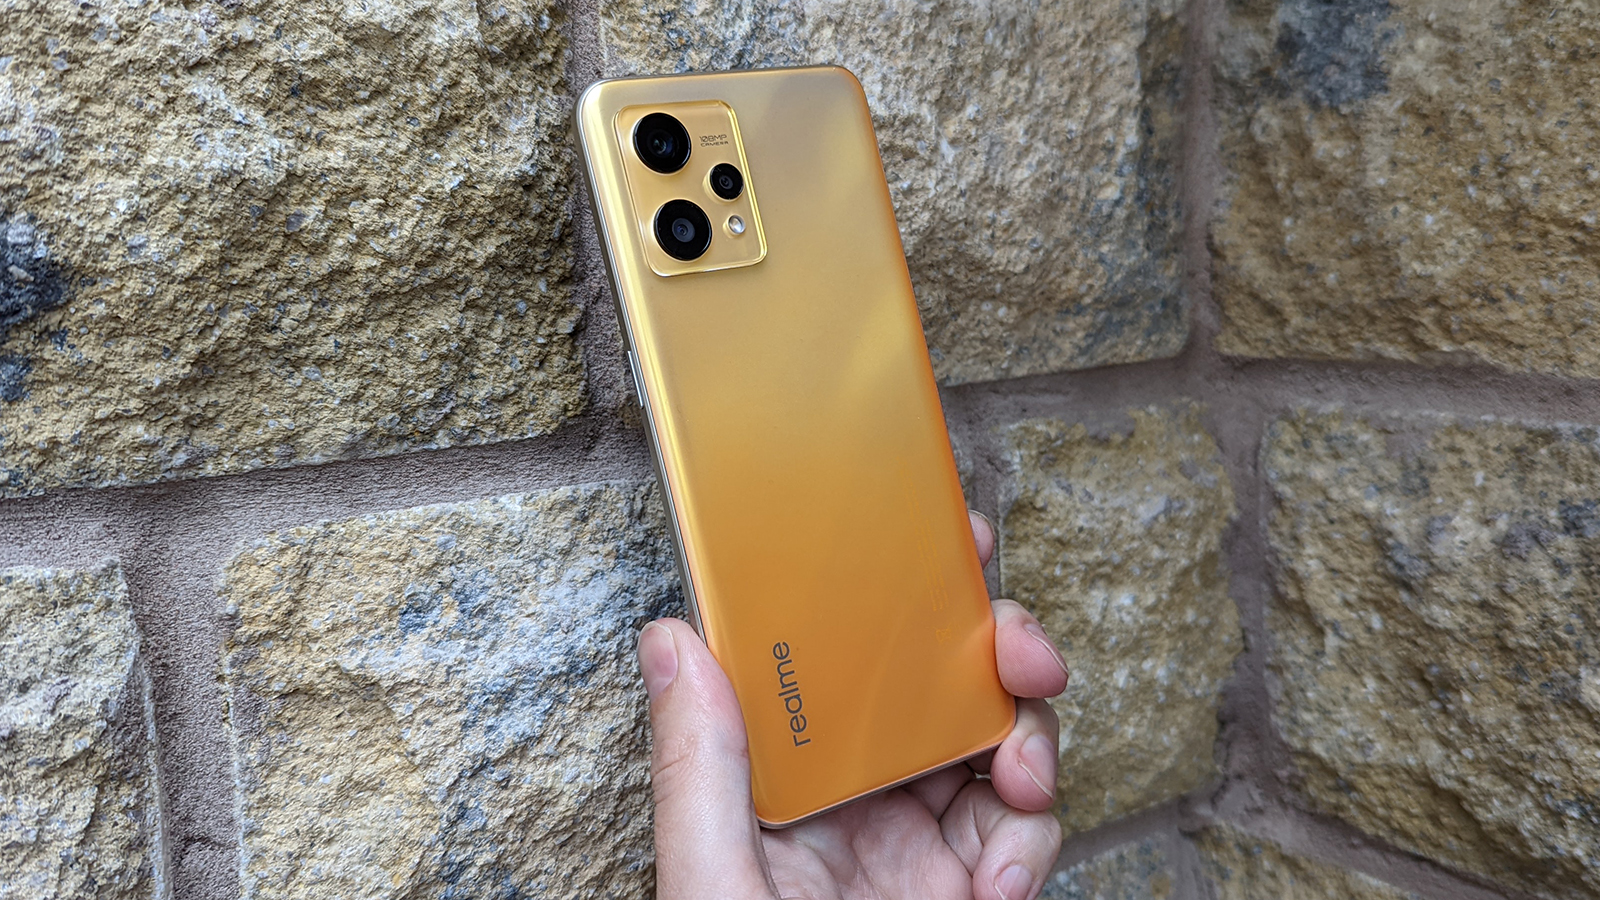 The back of the Realme 9 being held up against a wall